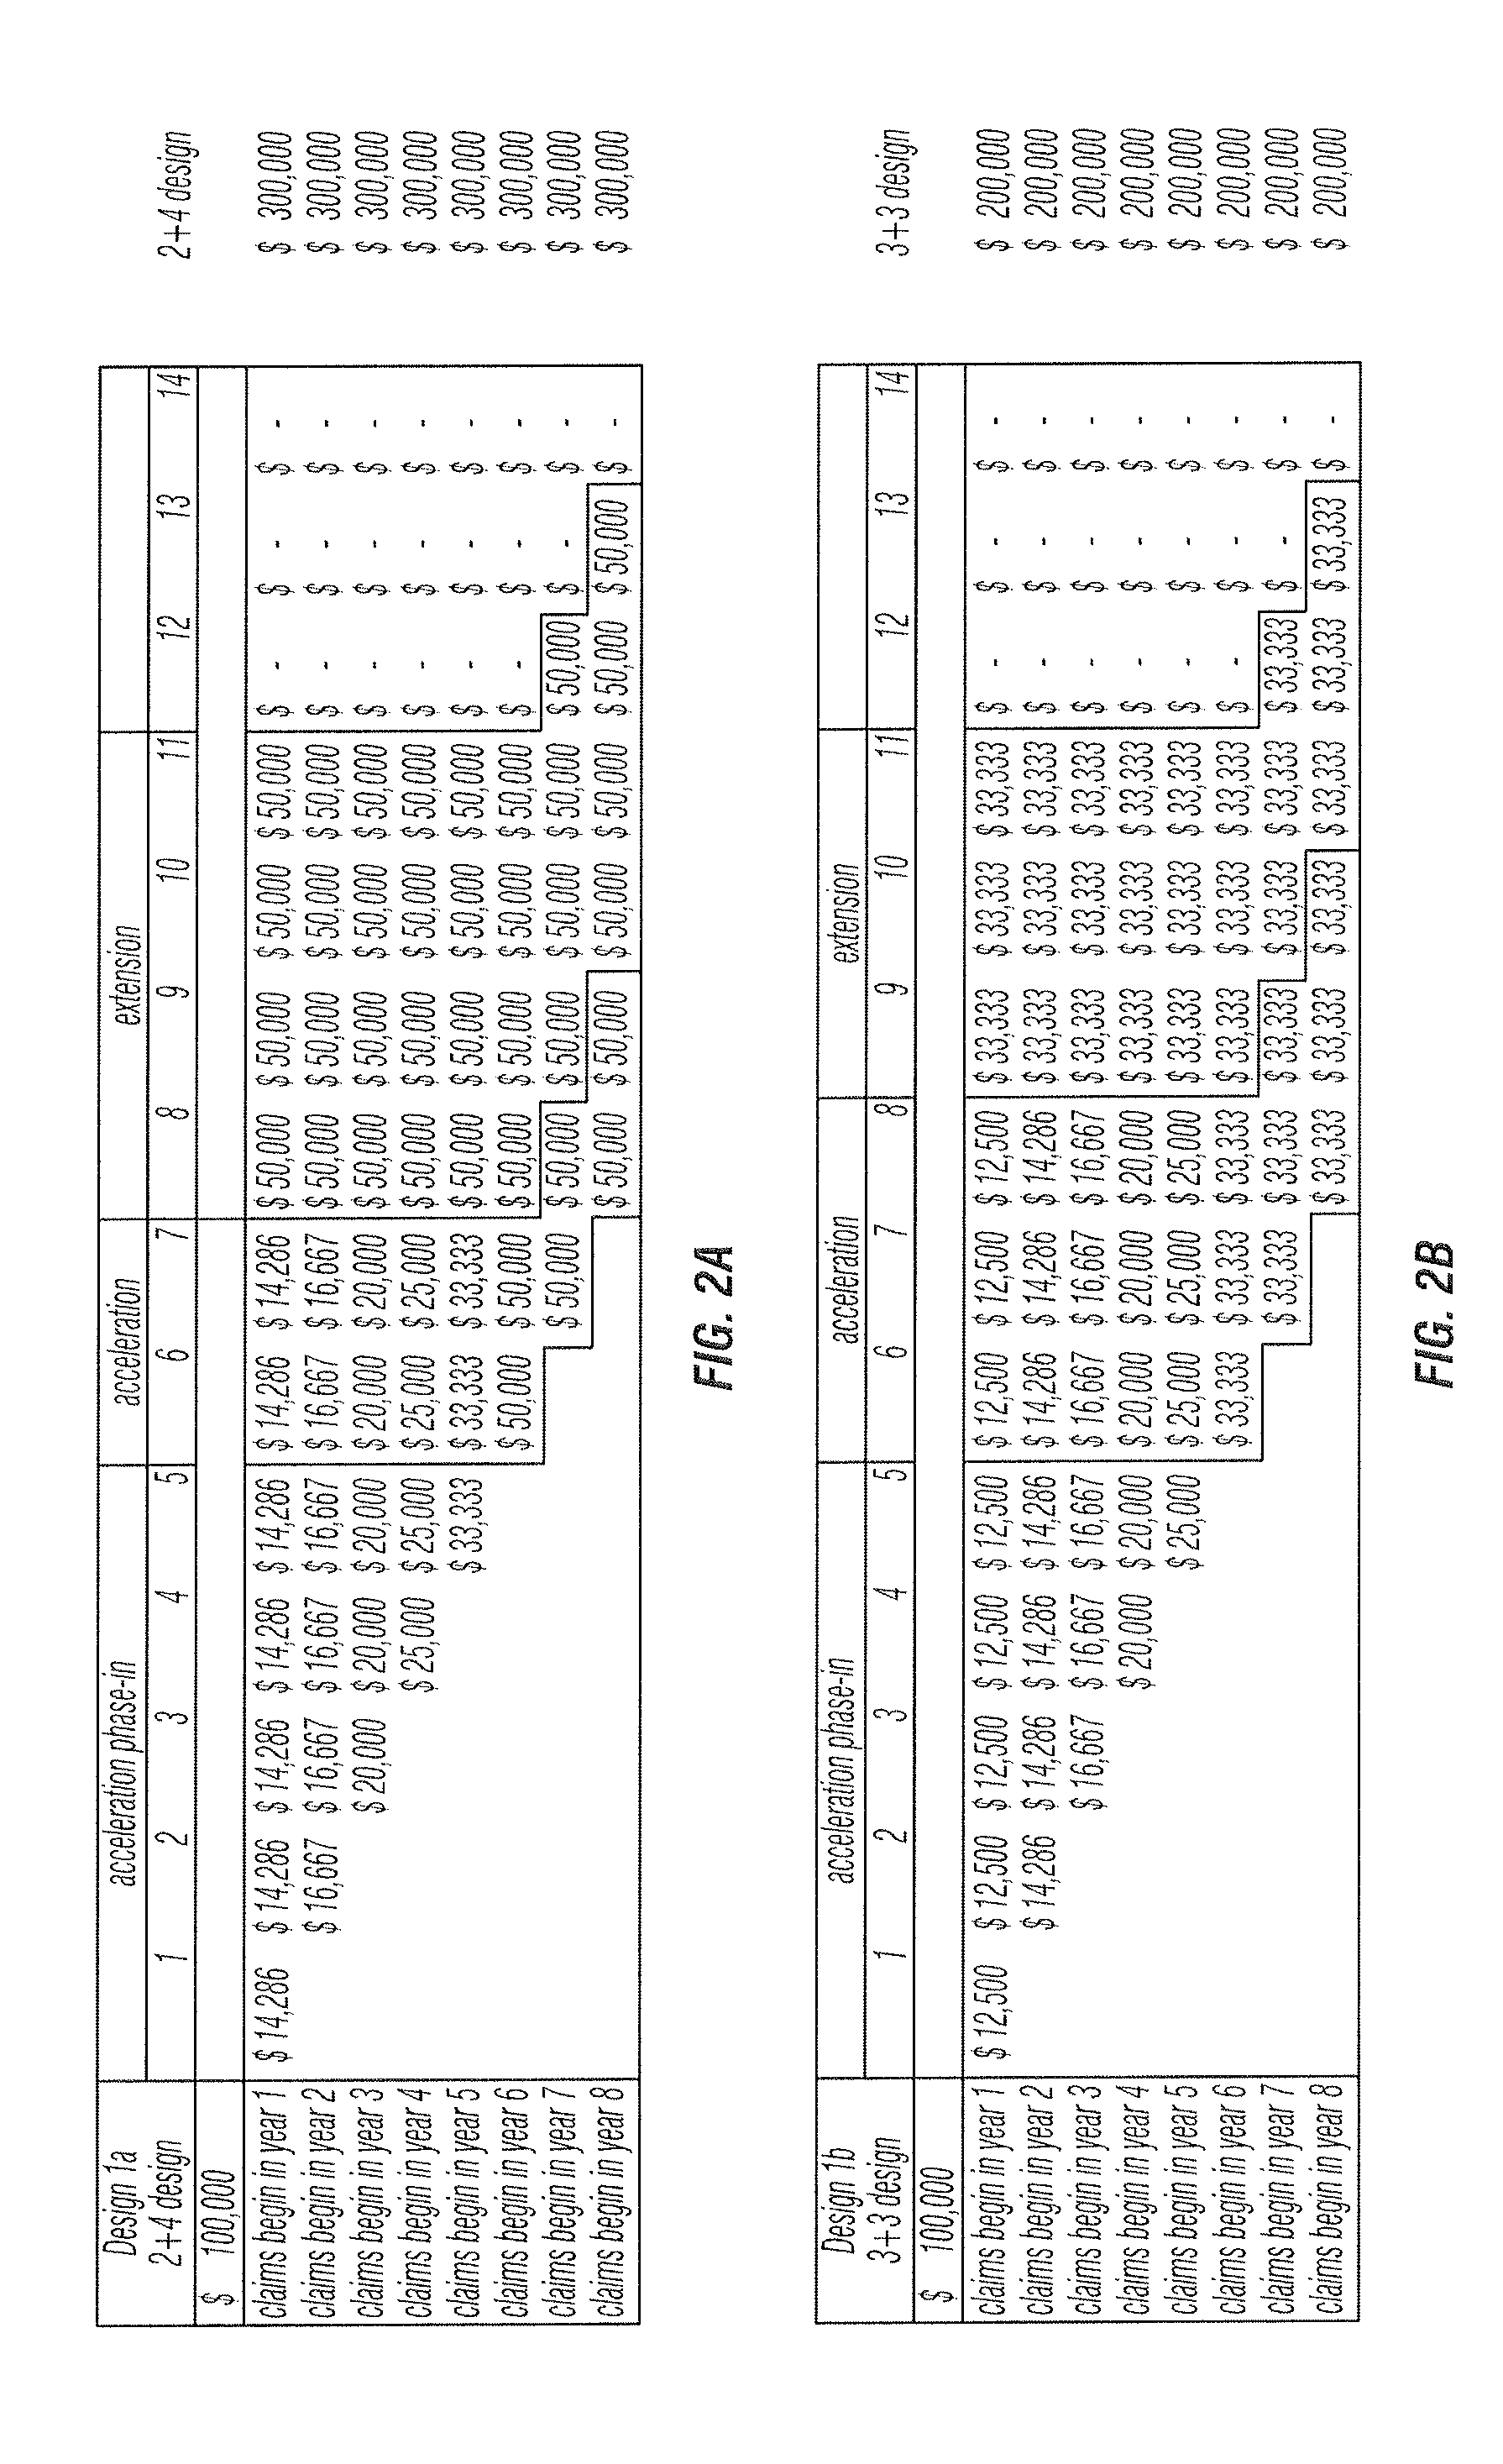 Computer Method and System for Administering Investment Account